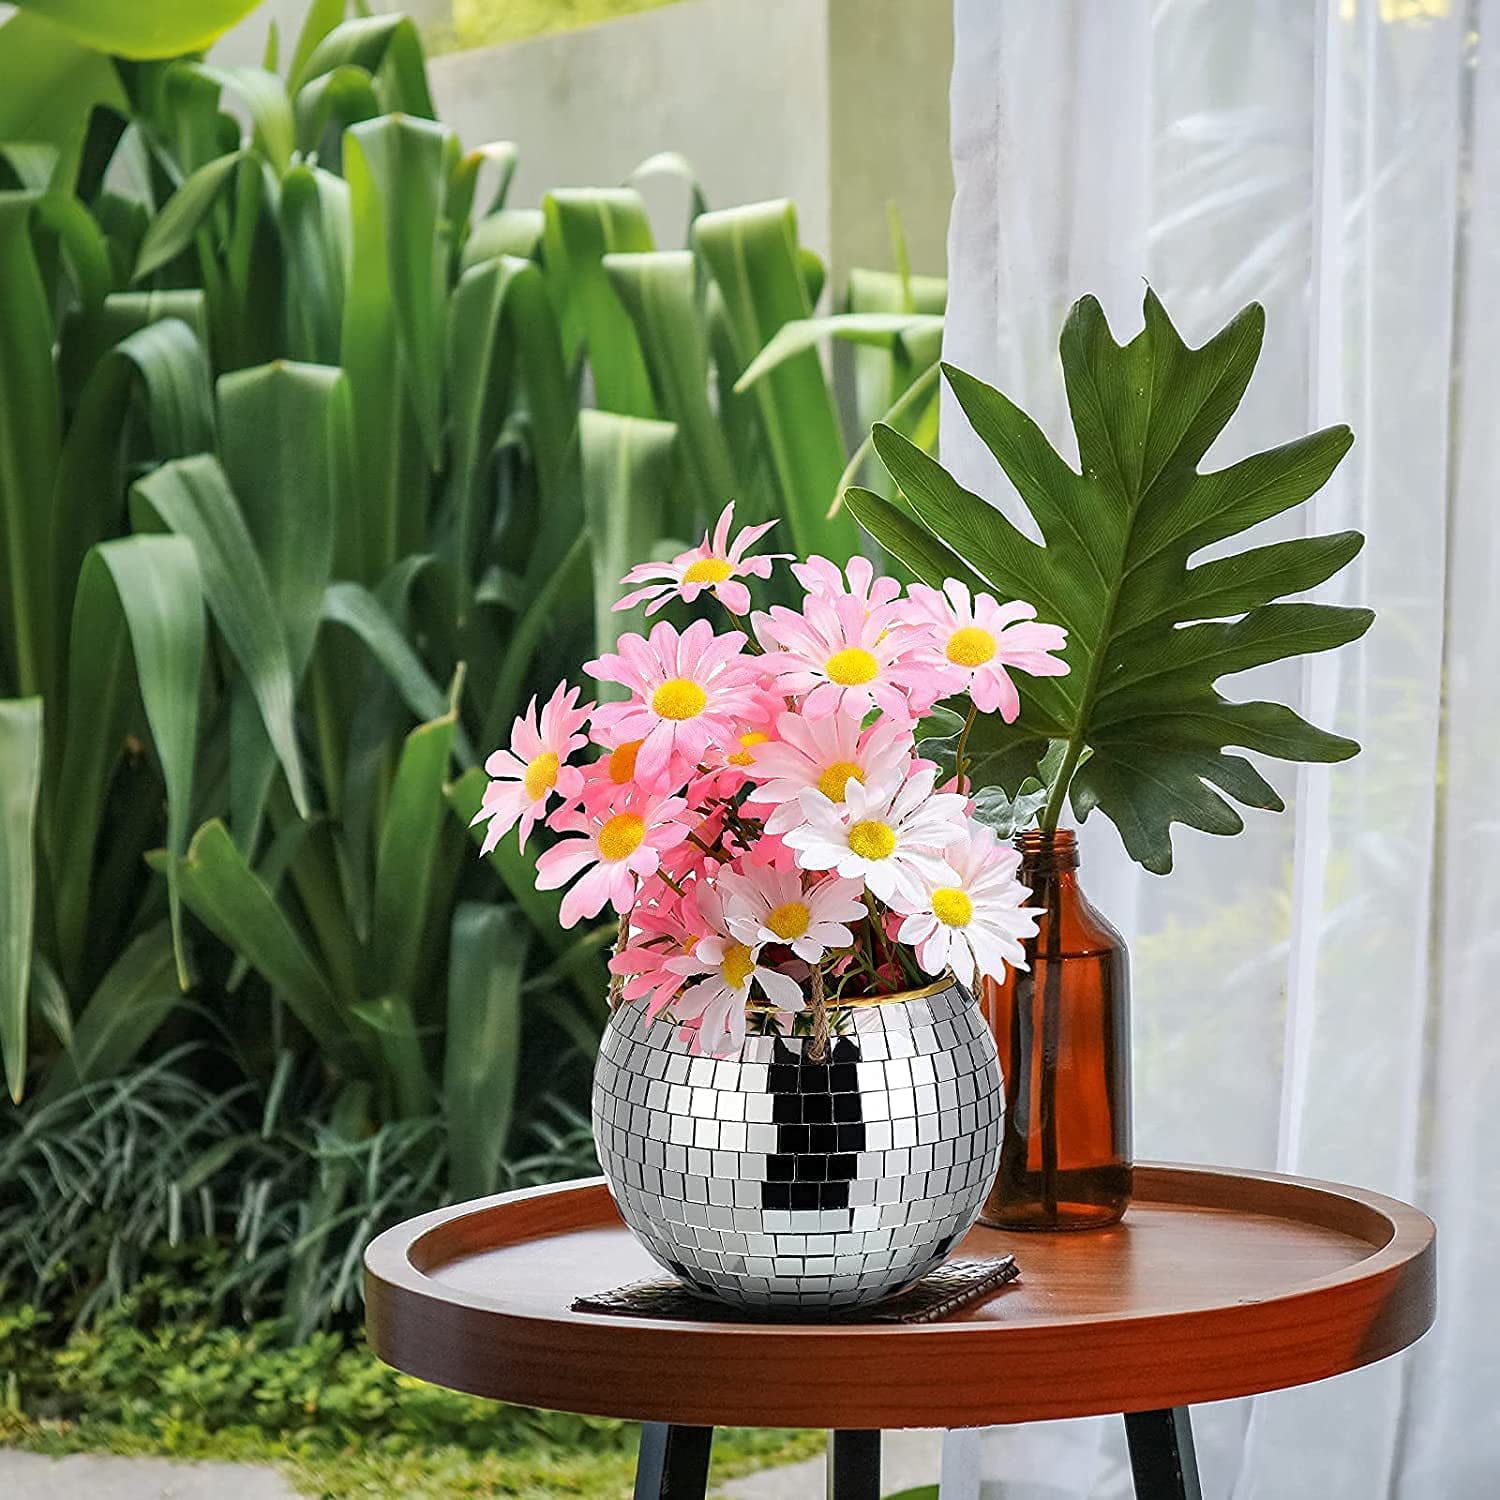 Disco Ball Planter, Hanging Macrame Rope Ball Planter Pot With Drainage  Hole For Plant Care, Indoor Or Outdoor Use For Room Office Patio Pot Decor  – Walmart Regarding Ball Plant Stands (View 5 of 15)